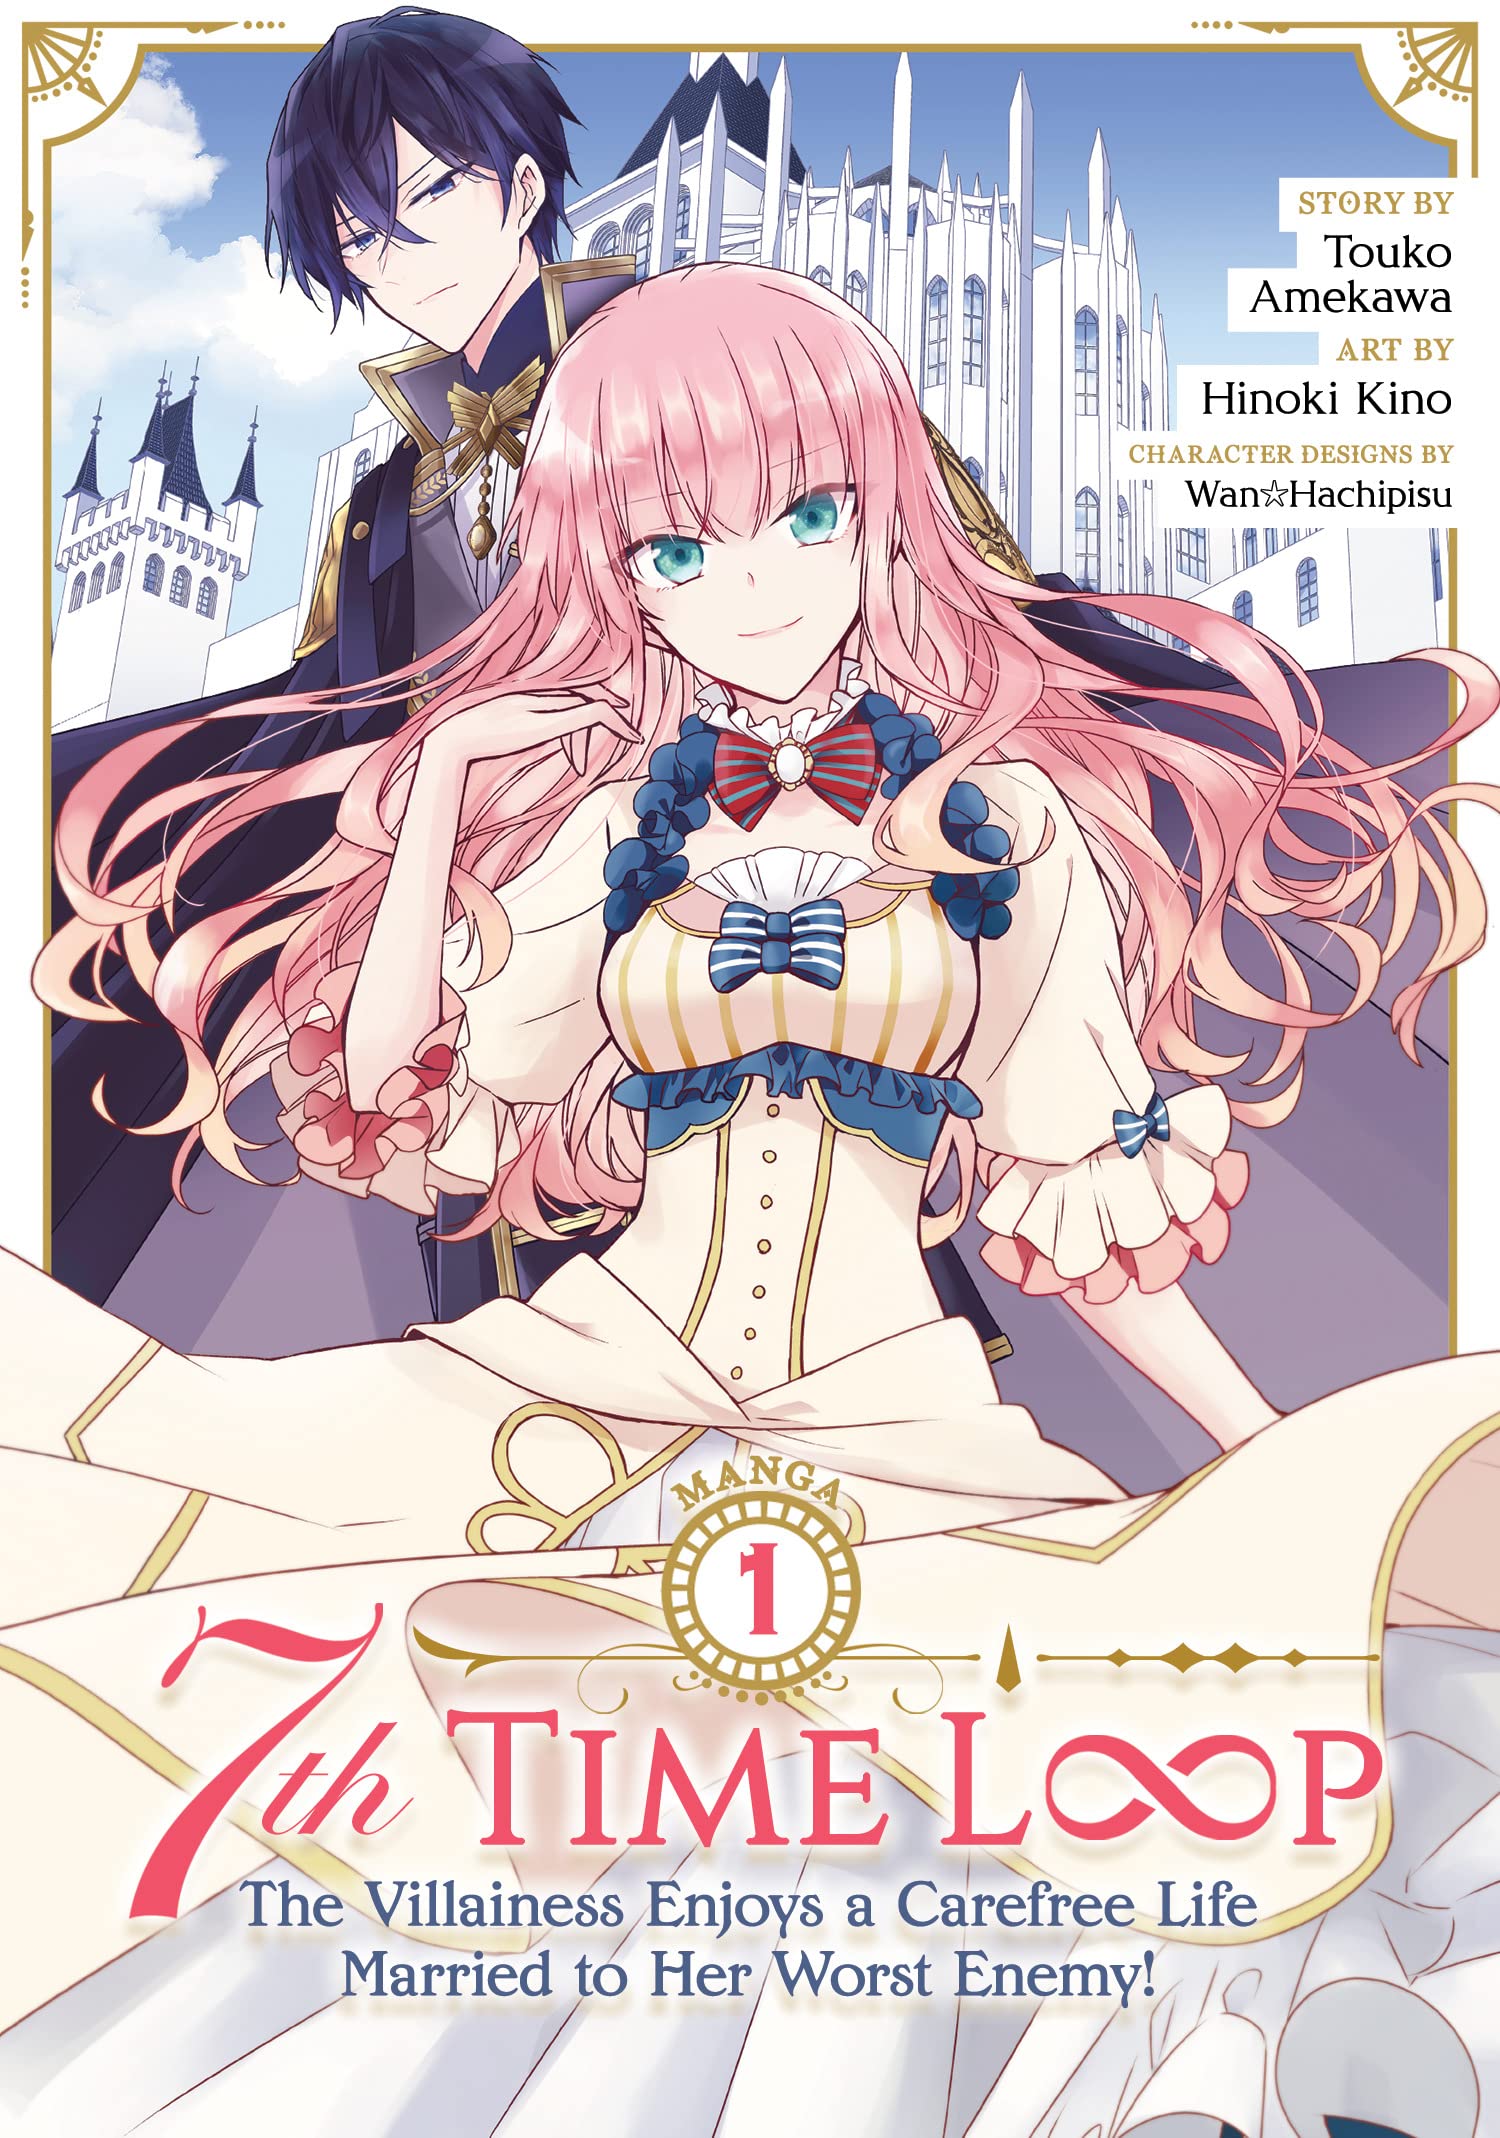 7th Time Loop: The Villainess Enjoys a Carefree Life Married to Her Worst Enemy! (Manga) Vol. 01